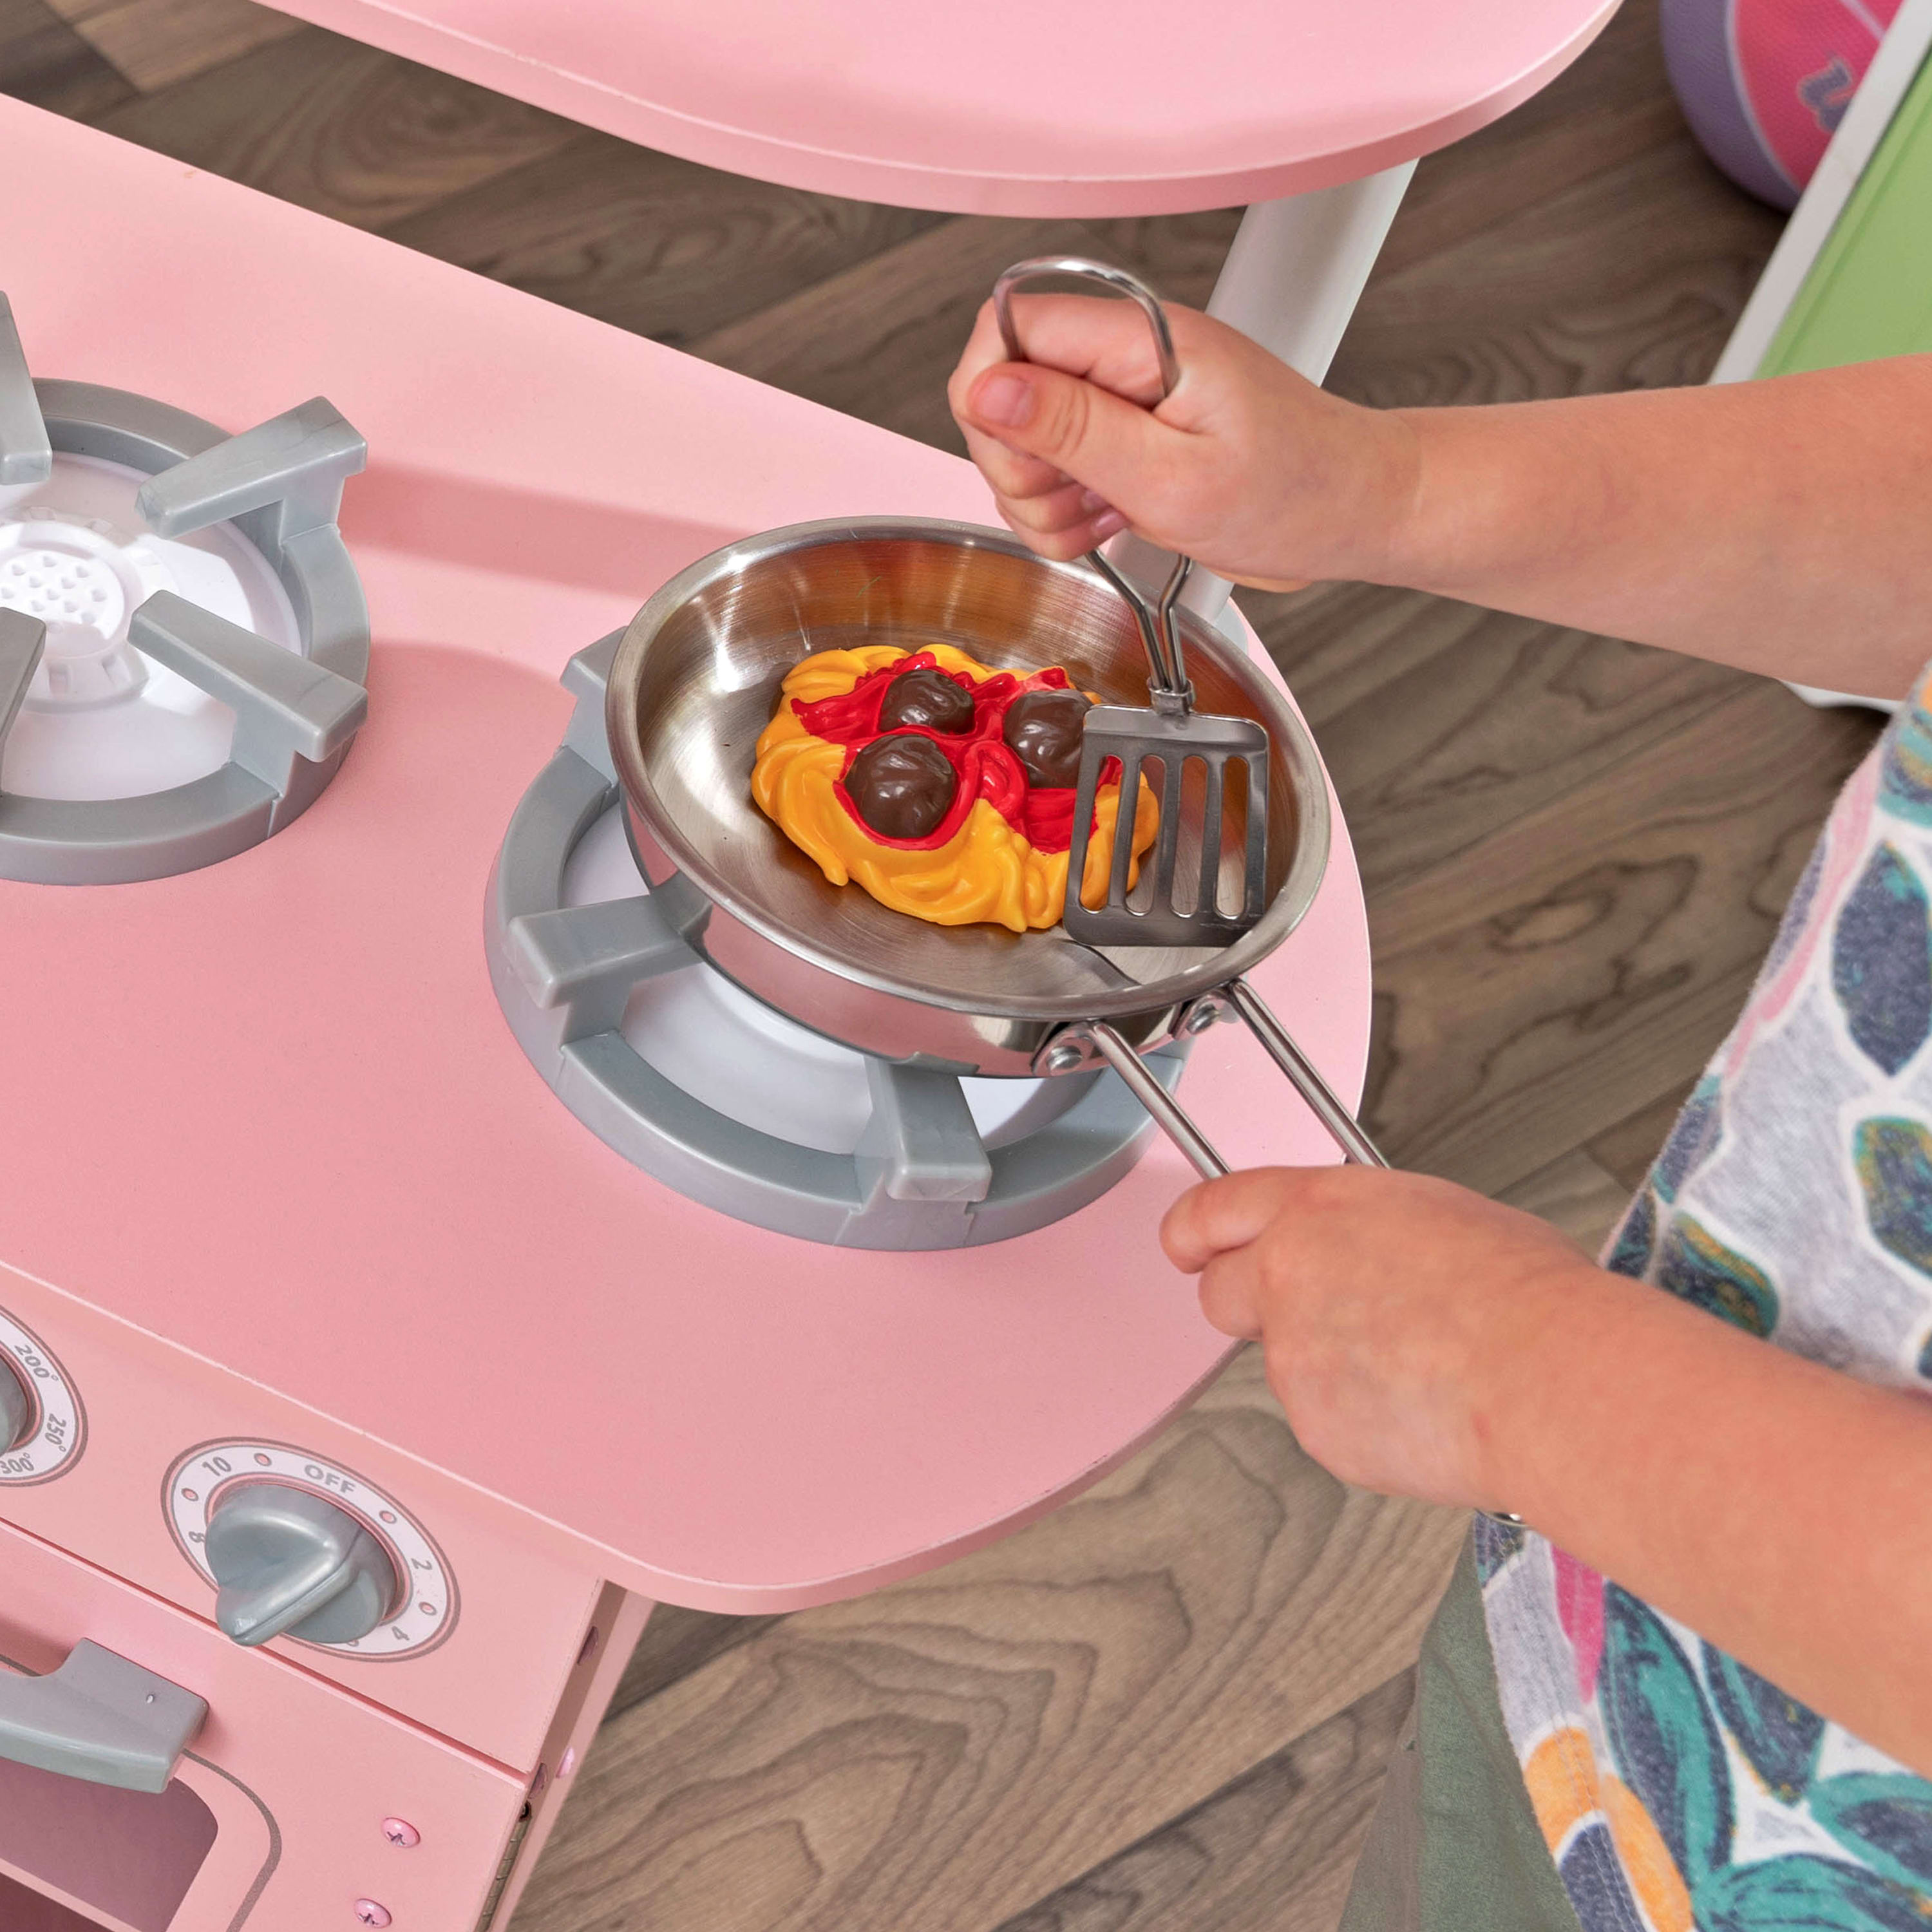 KidKraft Pink Vintage Wooden Play Kitchen with Pretend Ice Maker and Play Phone - image 5 of 11